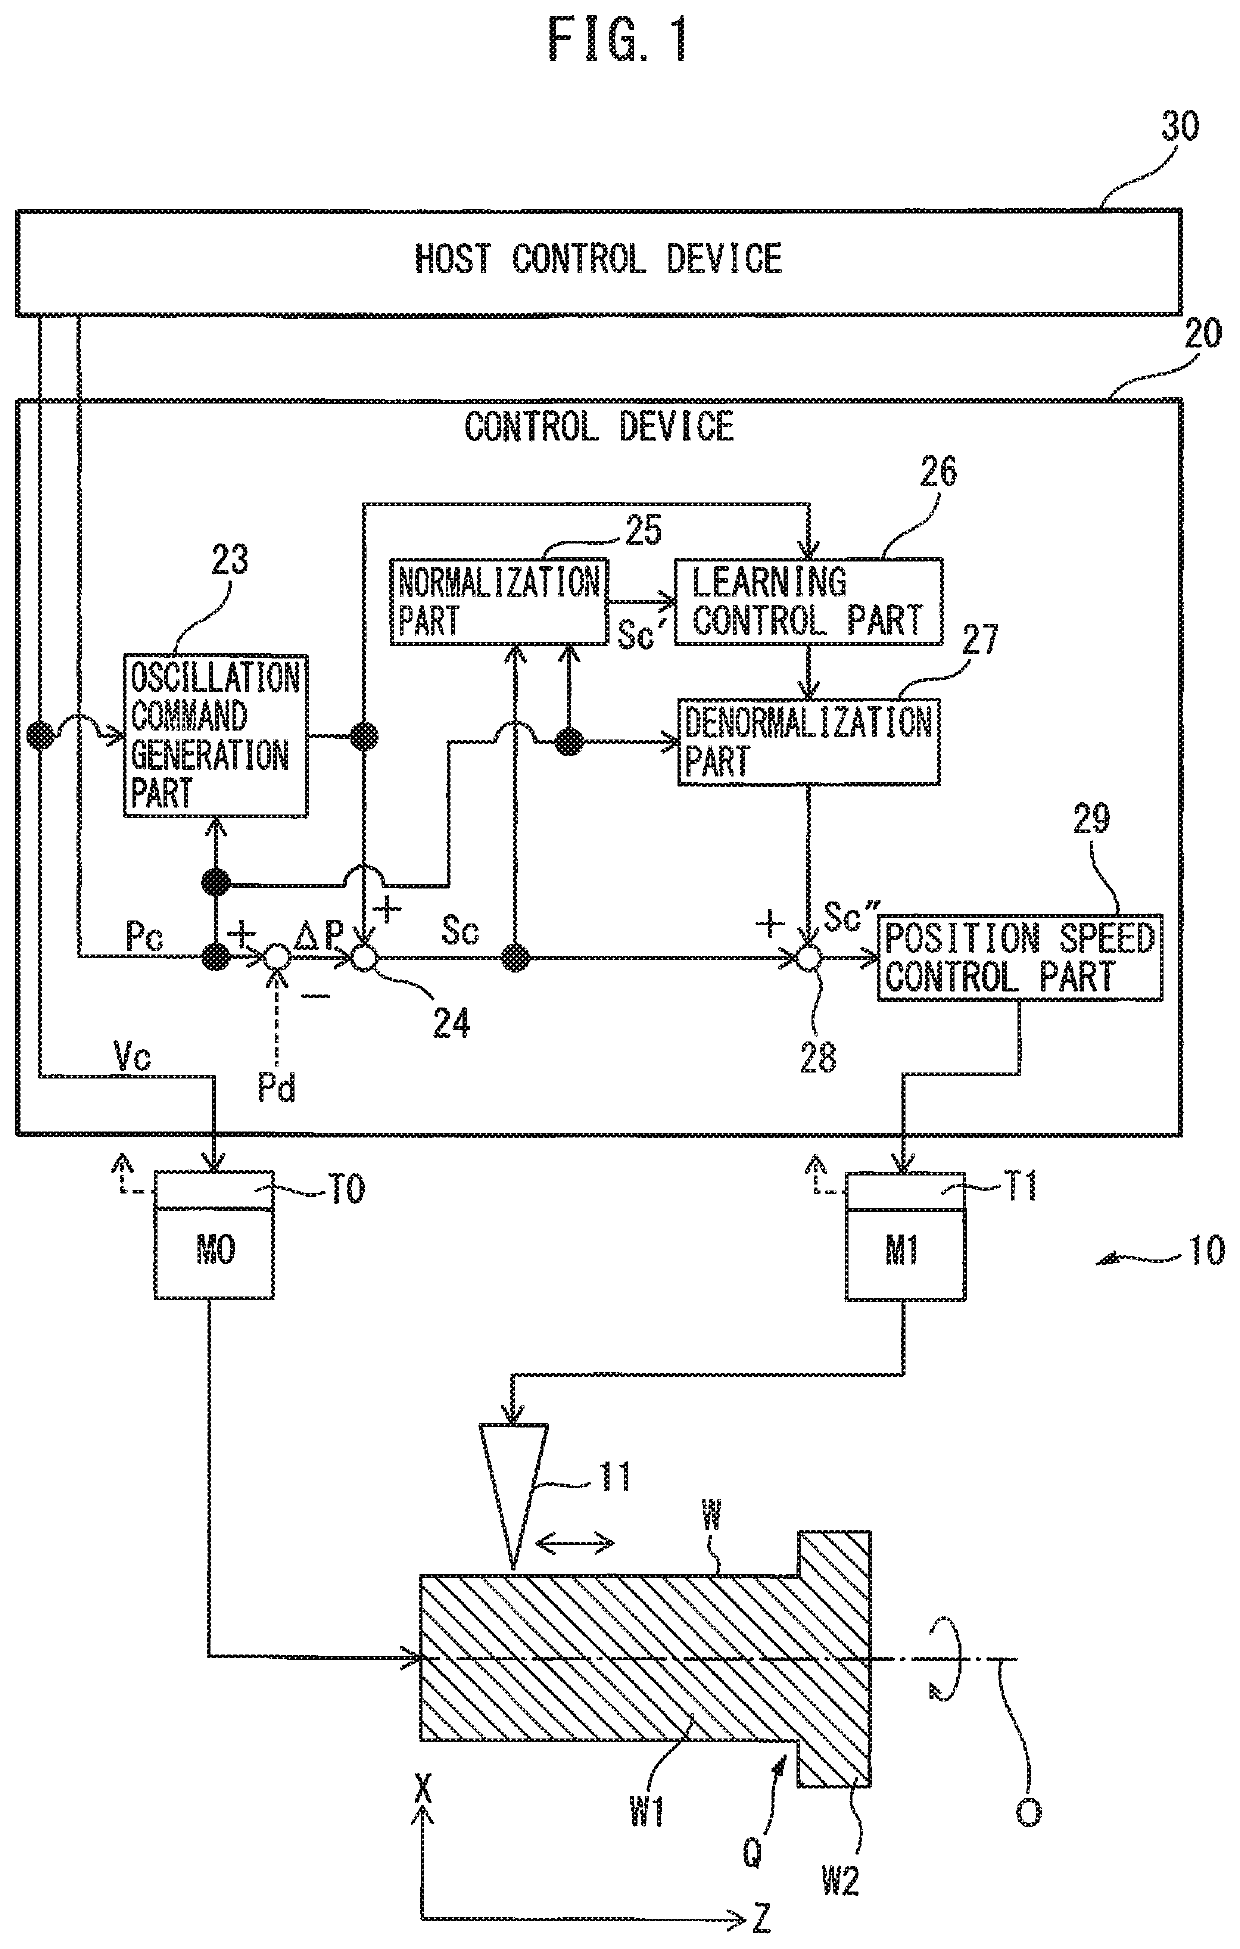 Control device for machine tool performing oscillation cutting